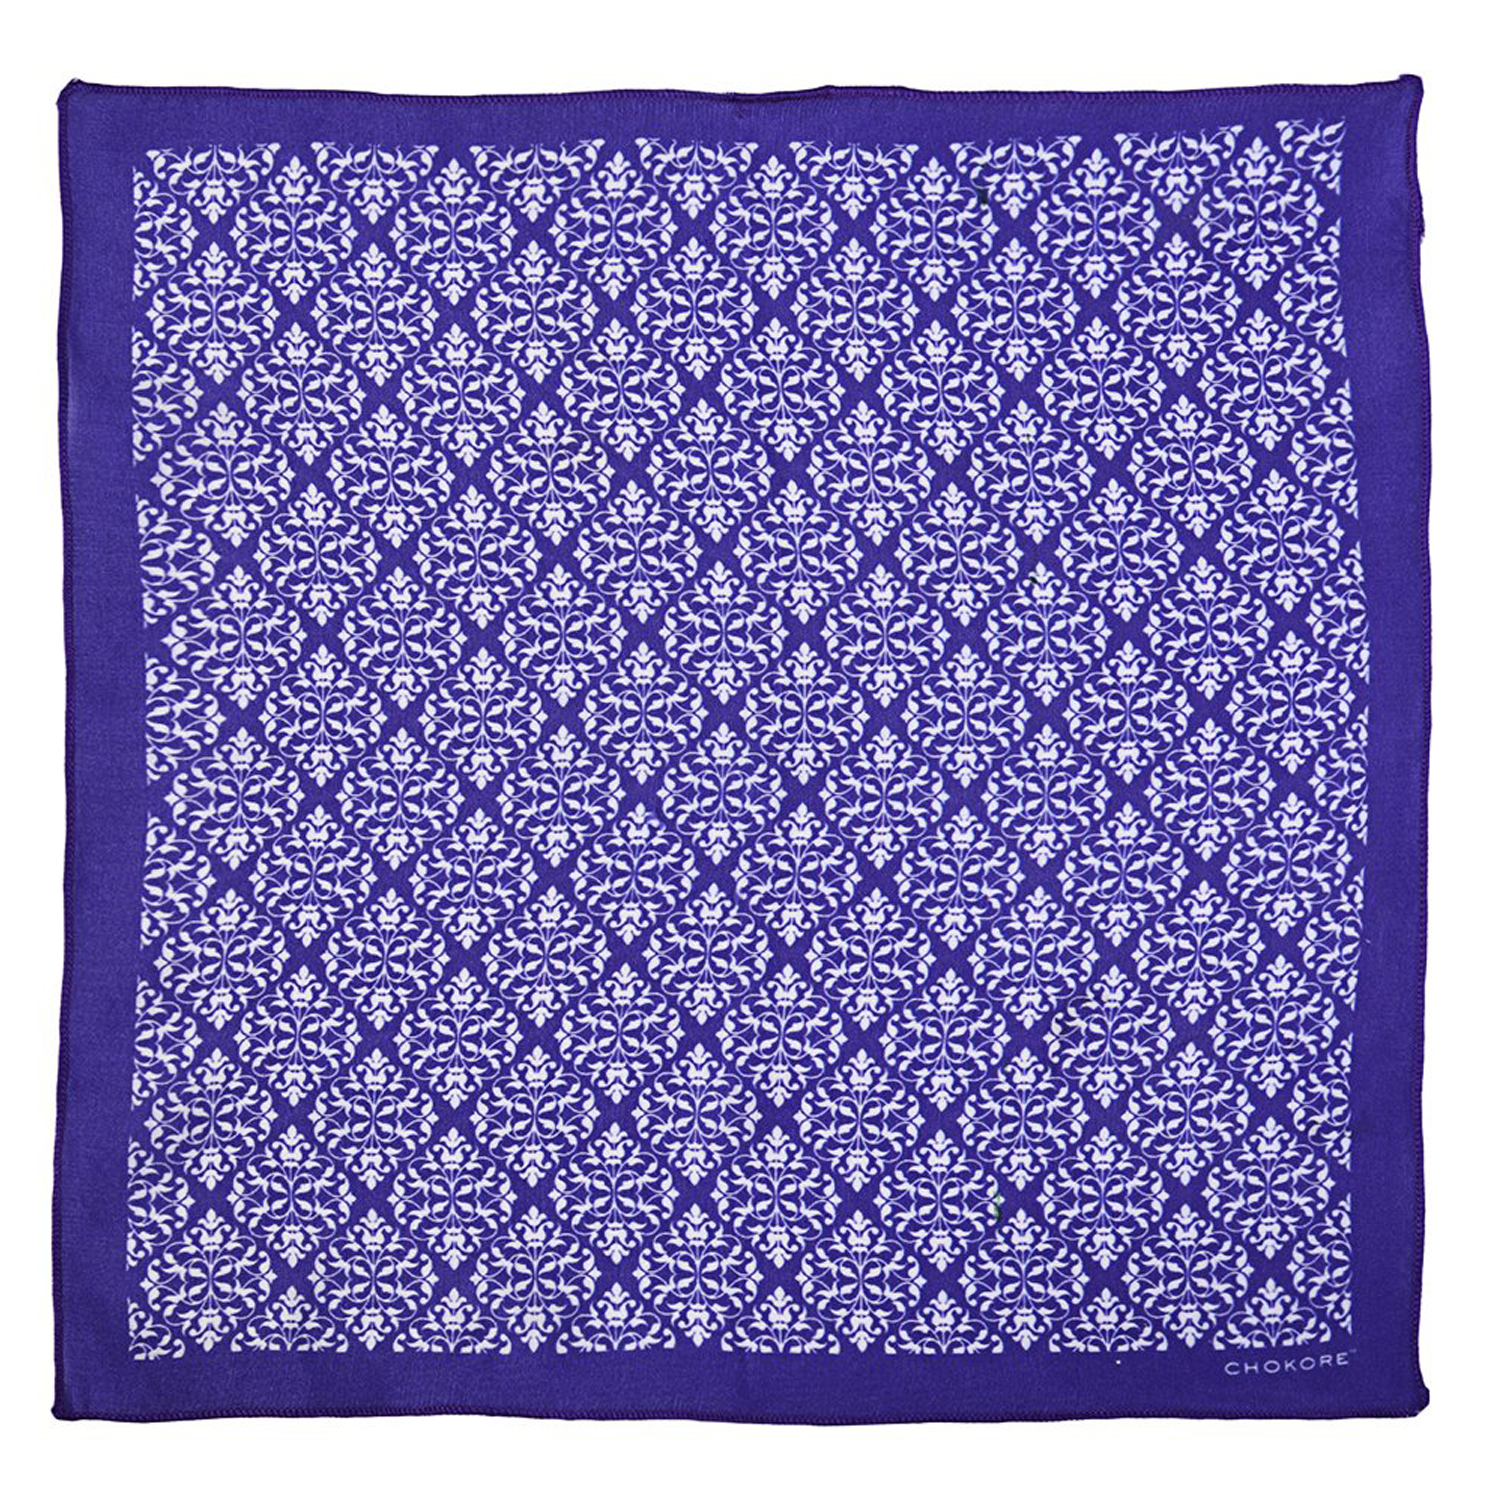 Chokore Blue & White Silk Pocket Squares from Indian at Heart collection